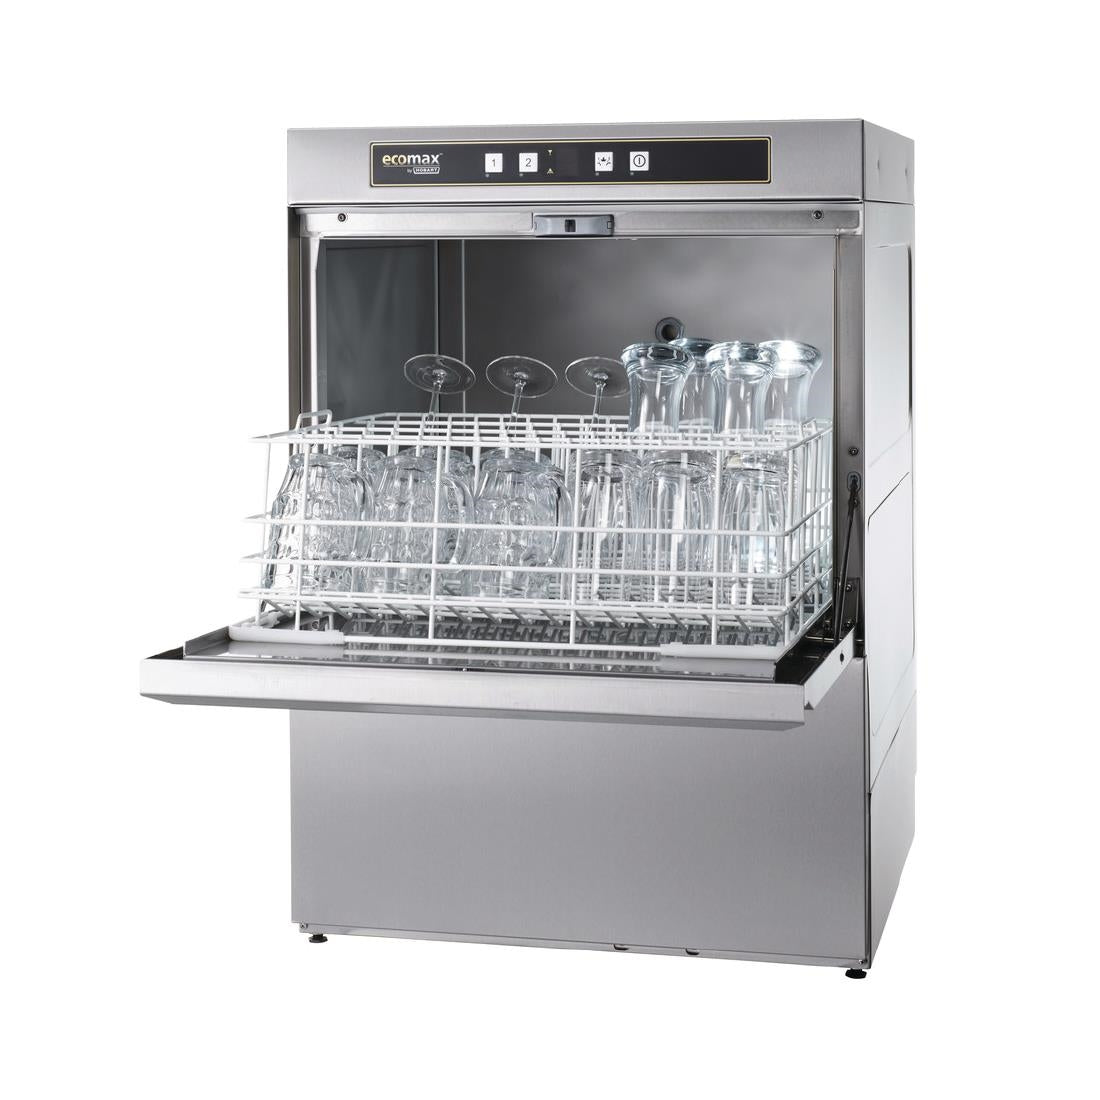 DW253-MO Hobart Ecomax Glasswasher G504S with Water Softener